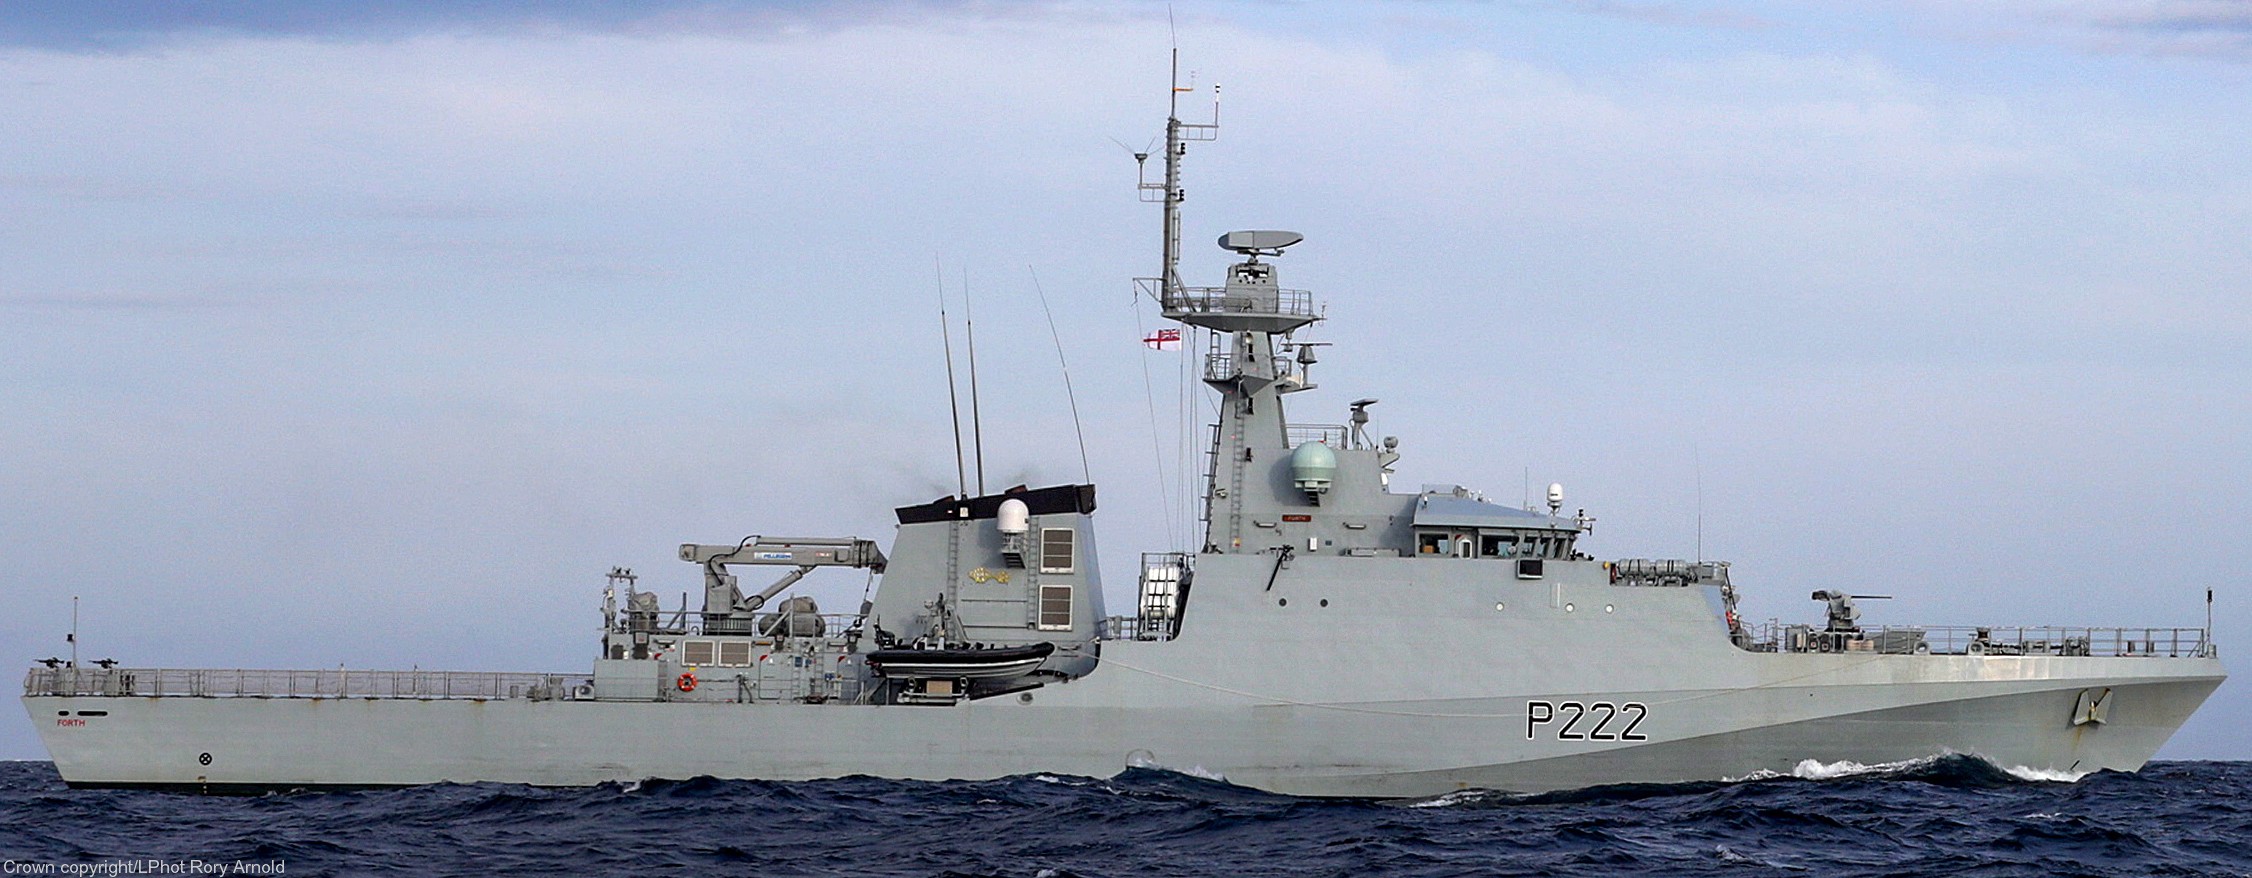 hms forth p 222 river class offshore patrol vessel royal navy